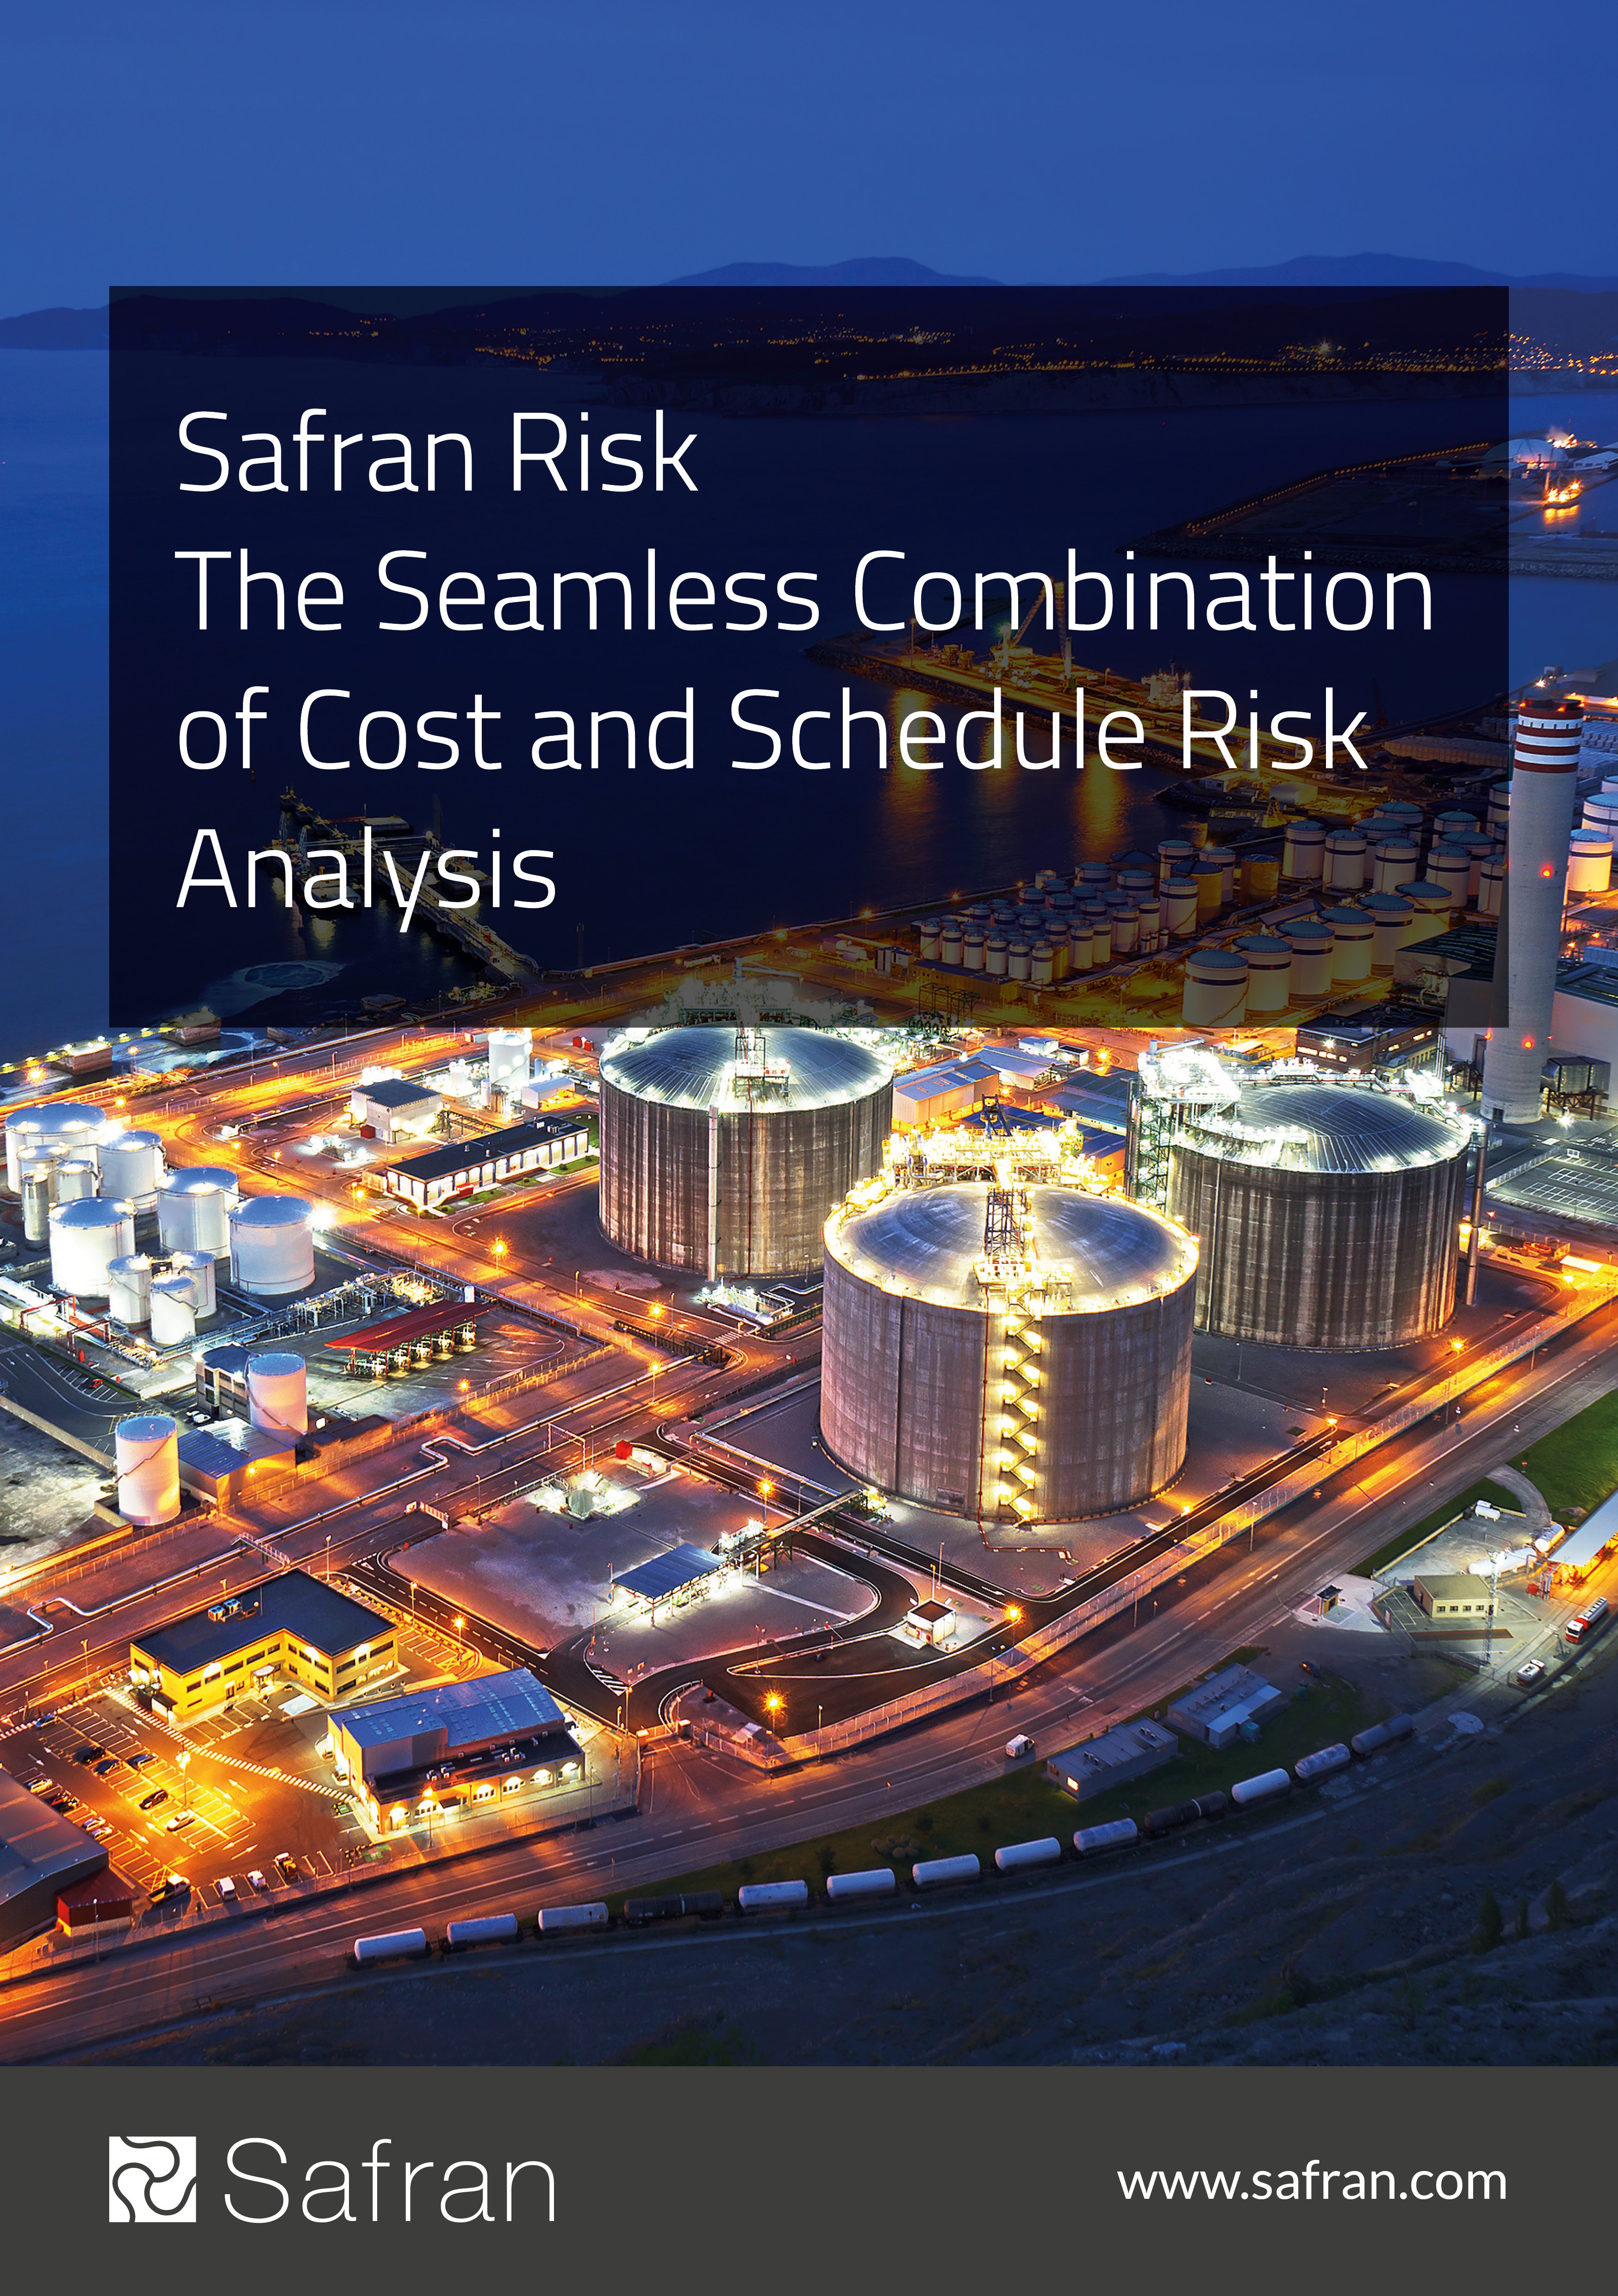 Safran Risk Combining Cost & Schedule Risk analysis